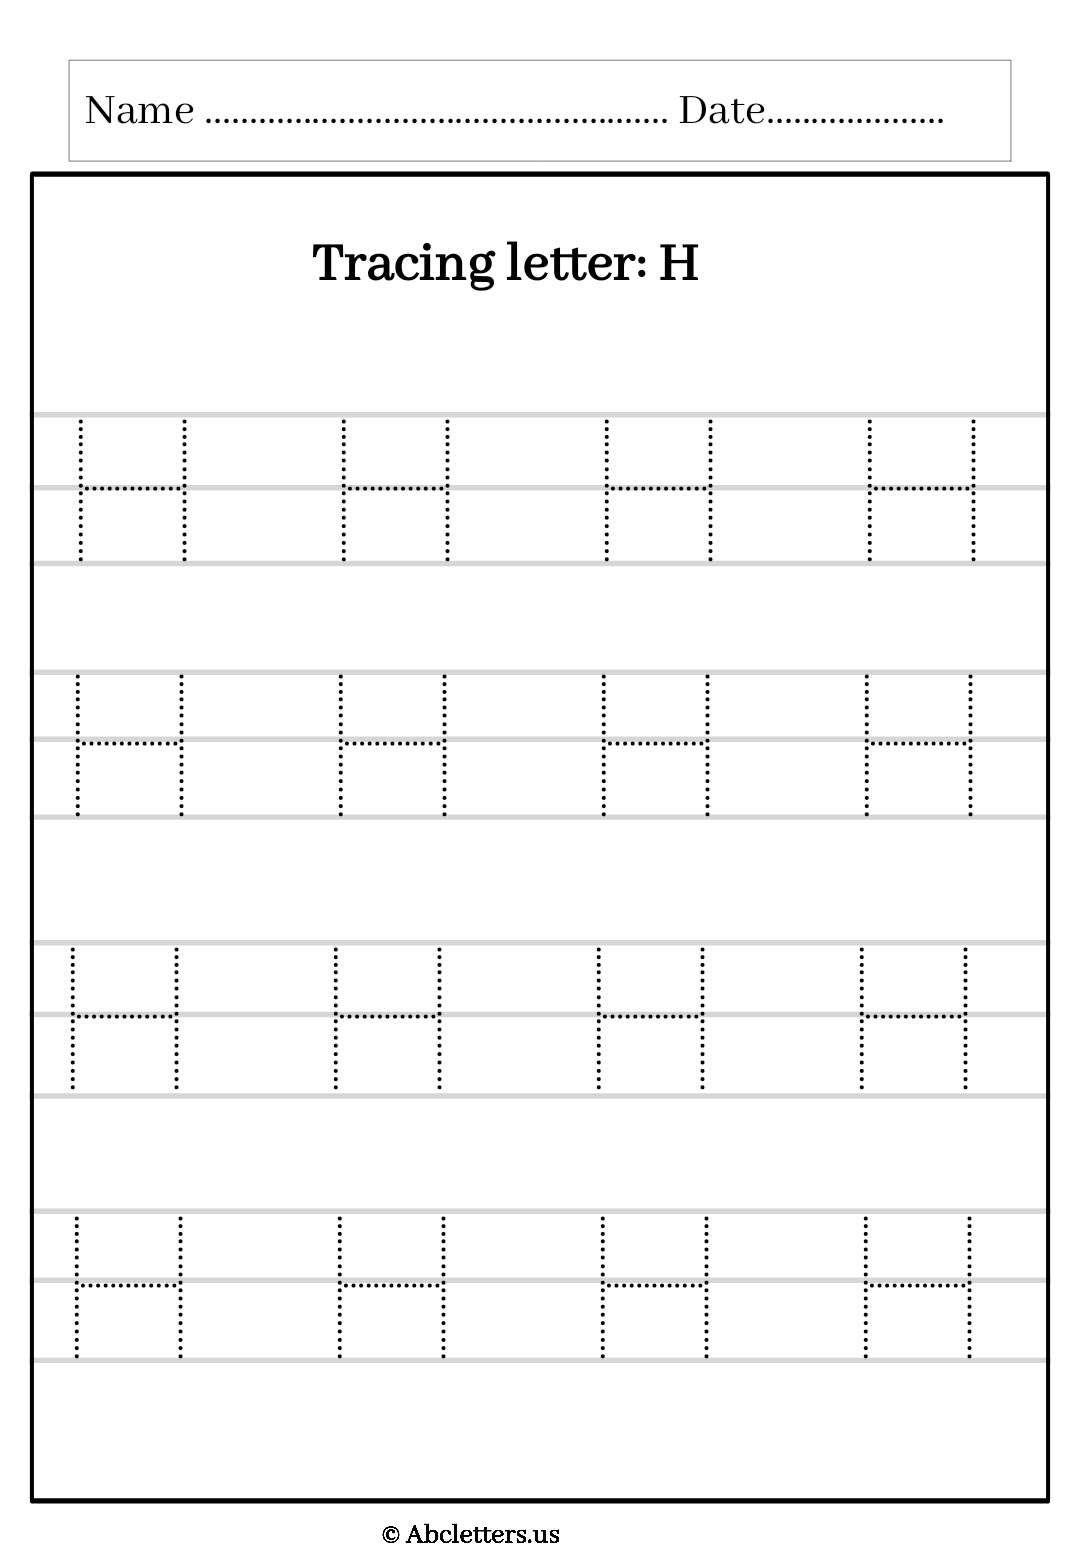 Tracing letter uppercase H with 3 lines